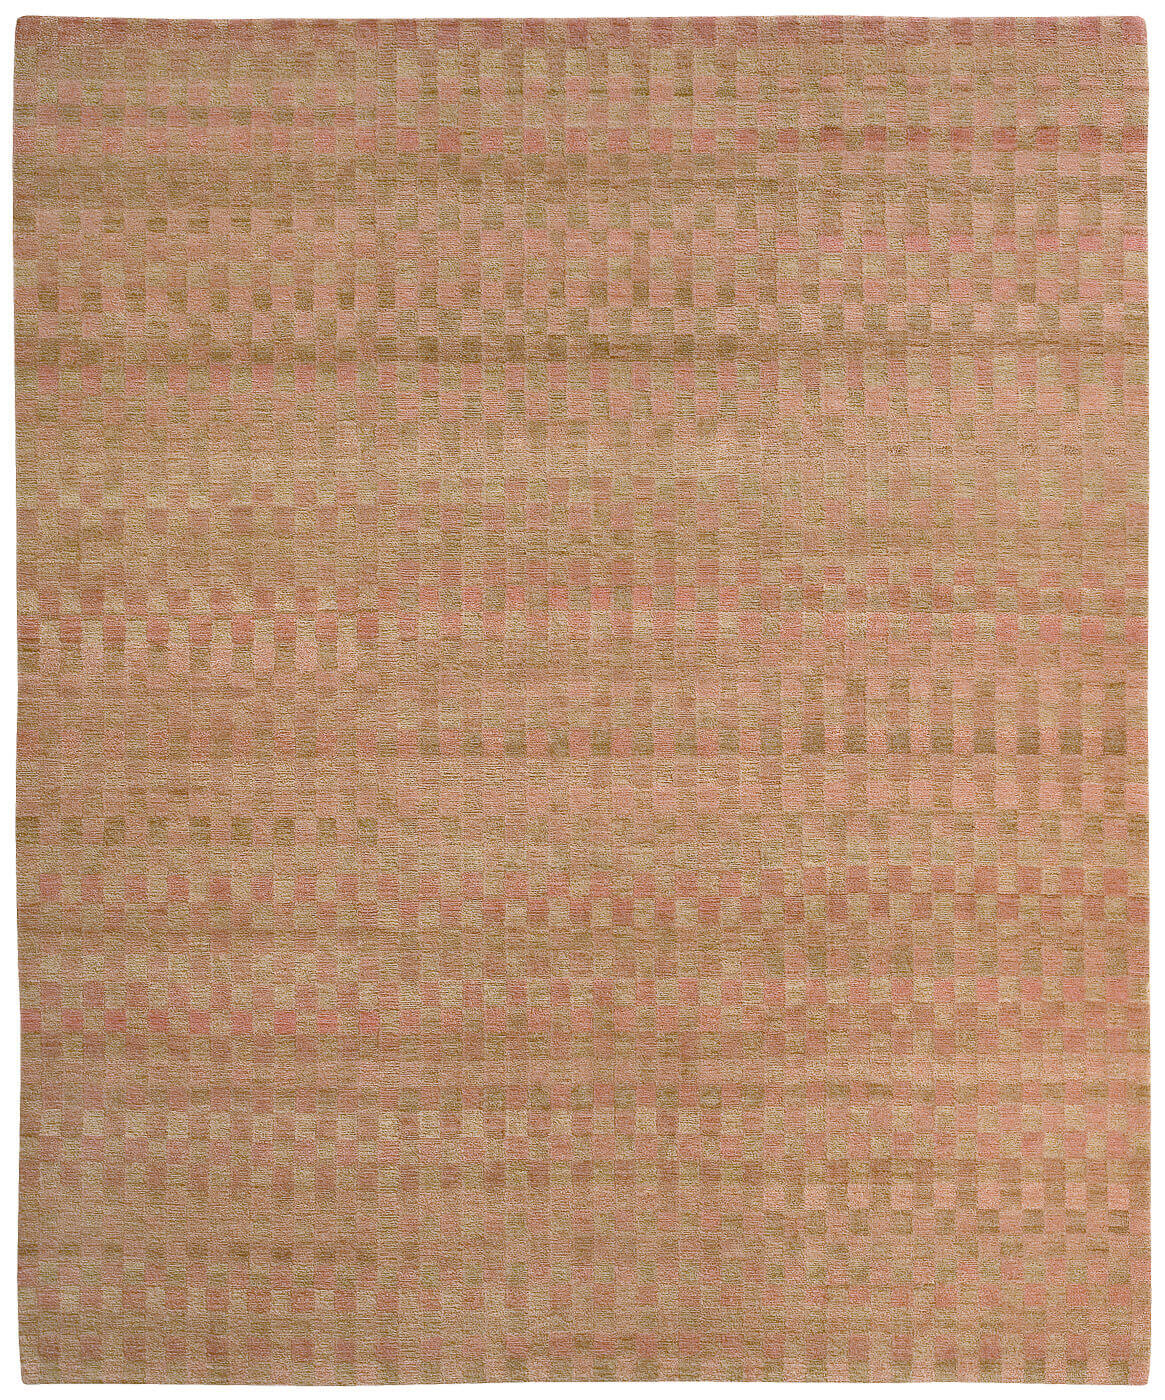 Hand-woven Checkered Luxury Rug ☞ Size: 300 x 400 cm